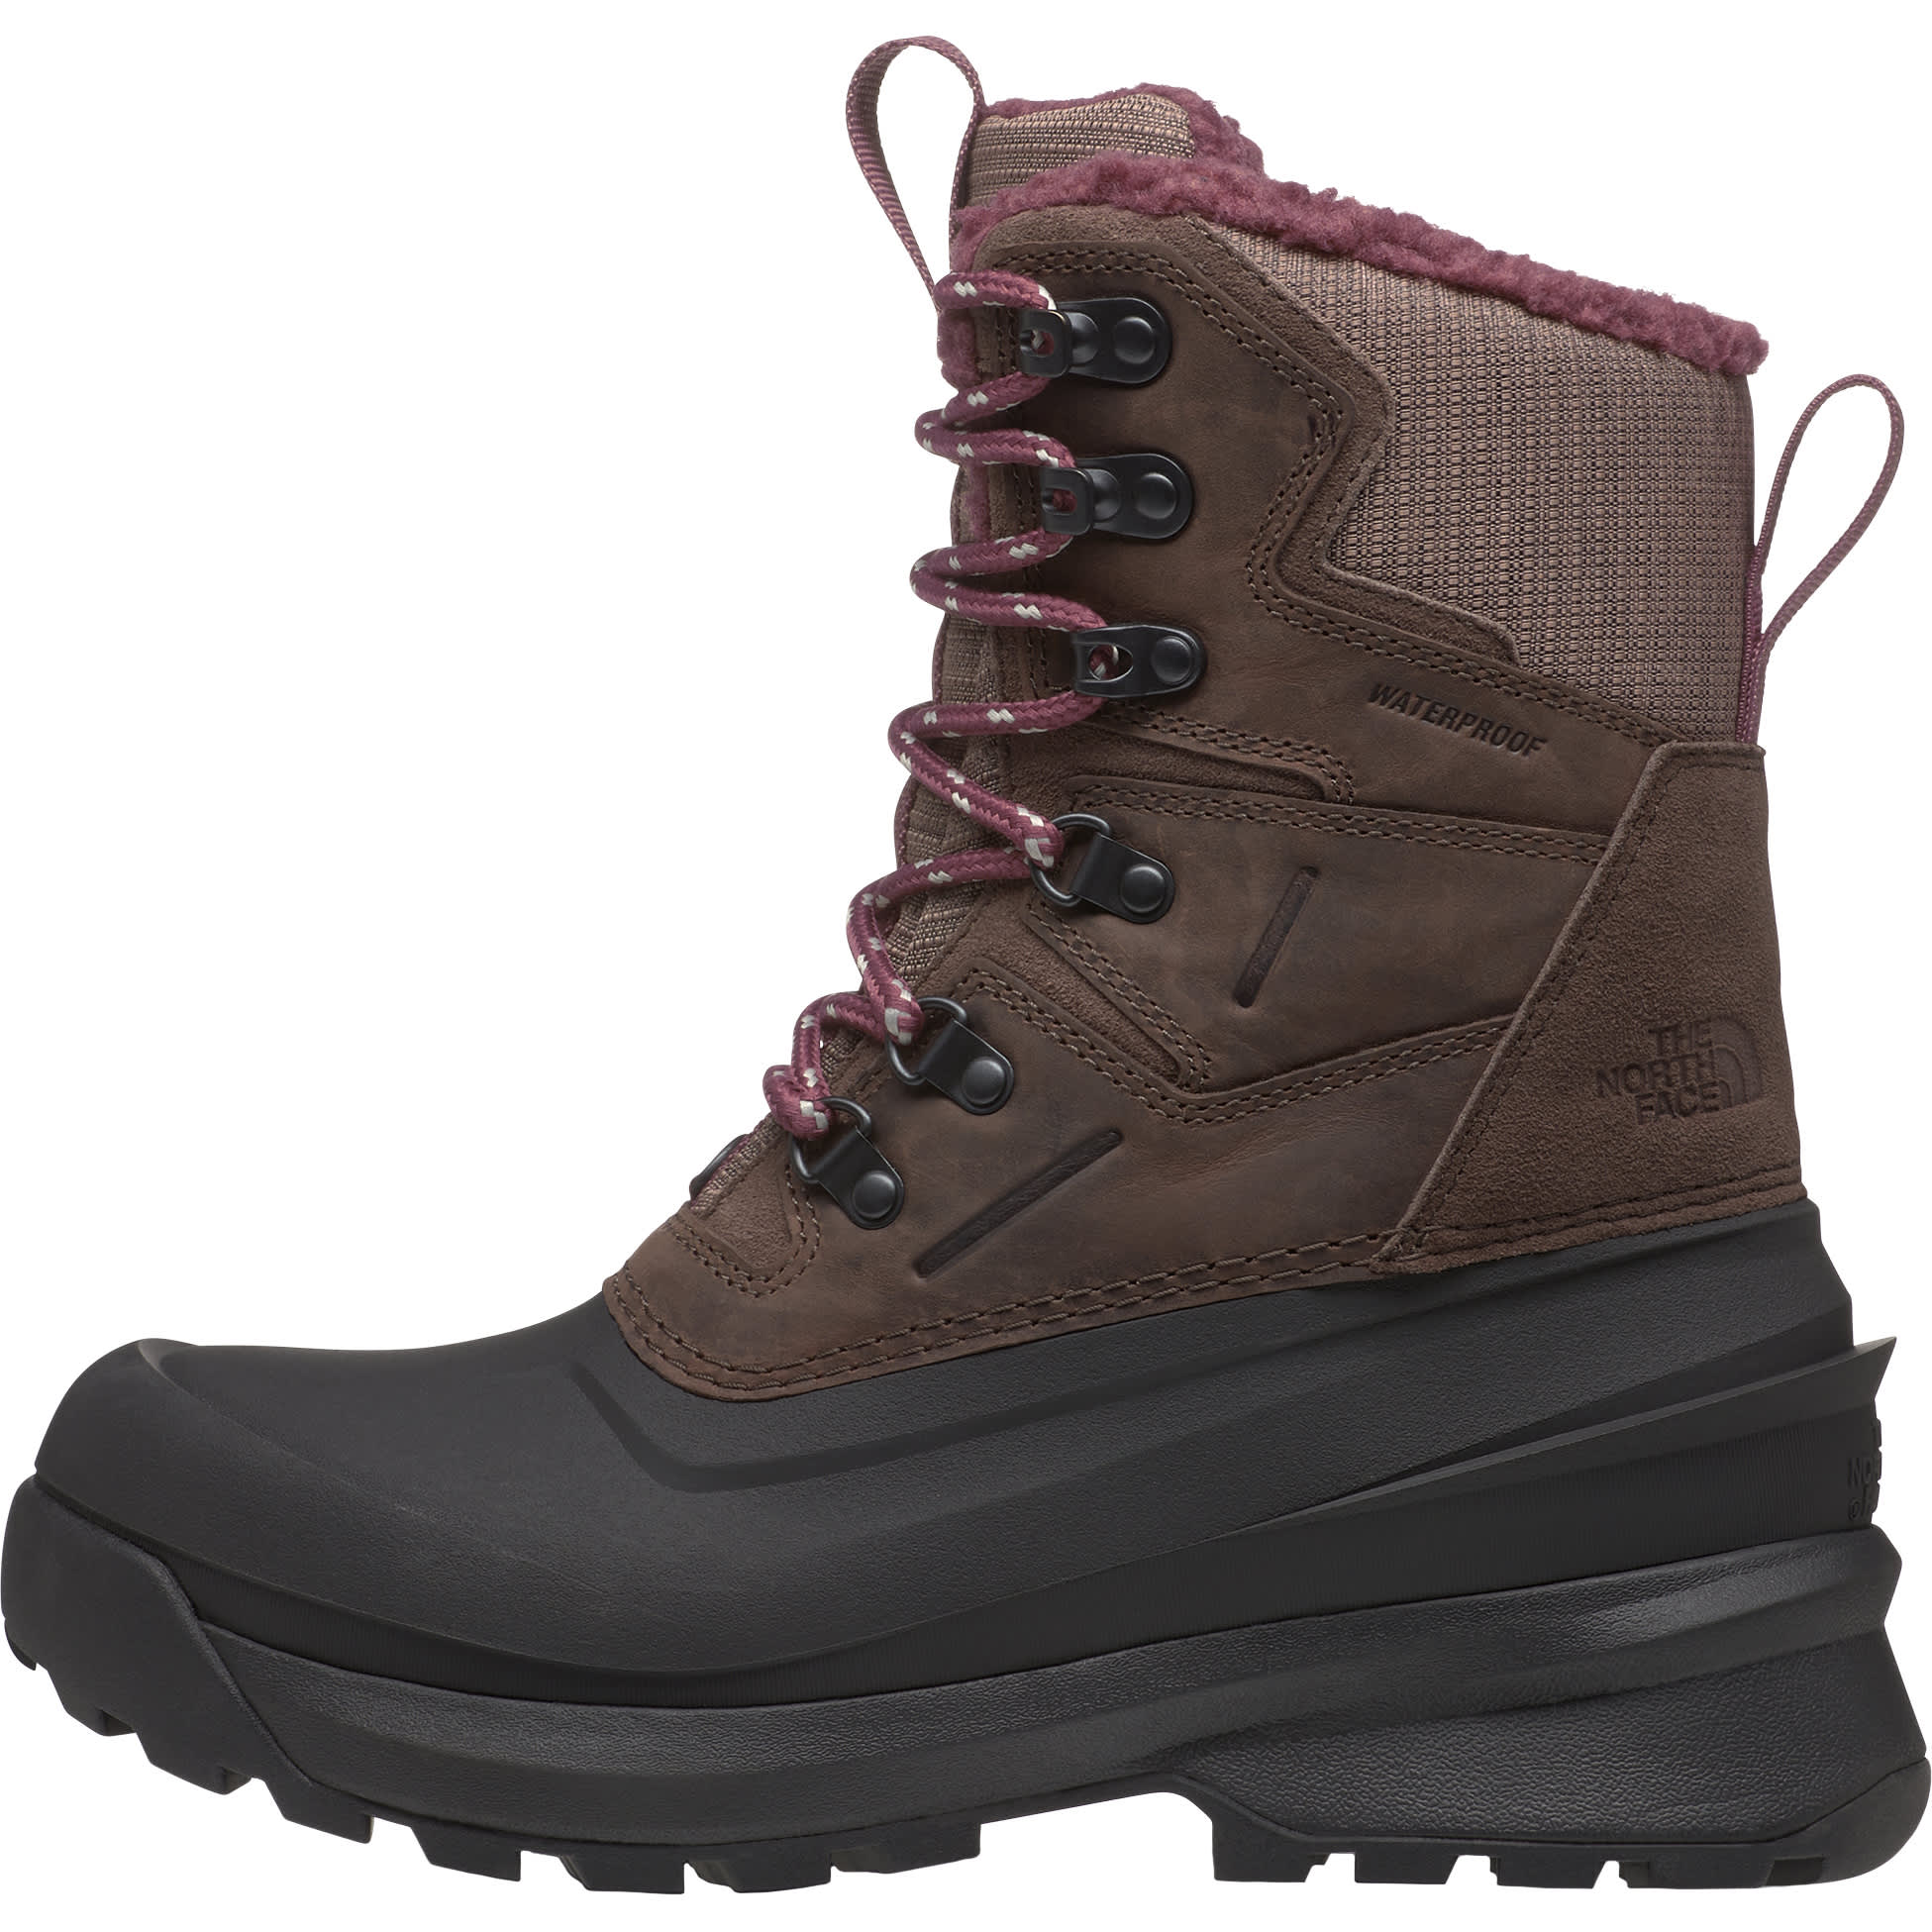 The North Face® Women’s Chilkat V 400 Waterproof Boots